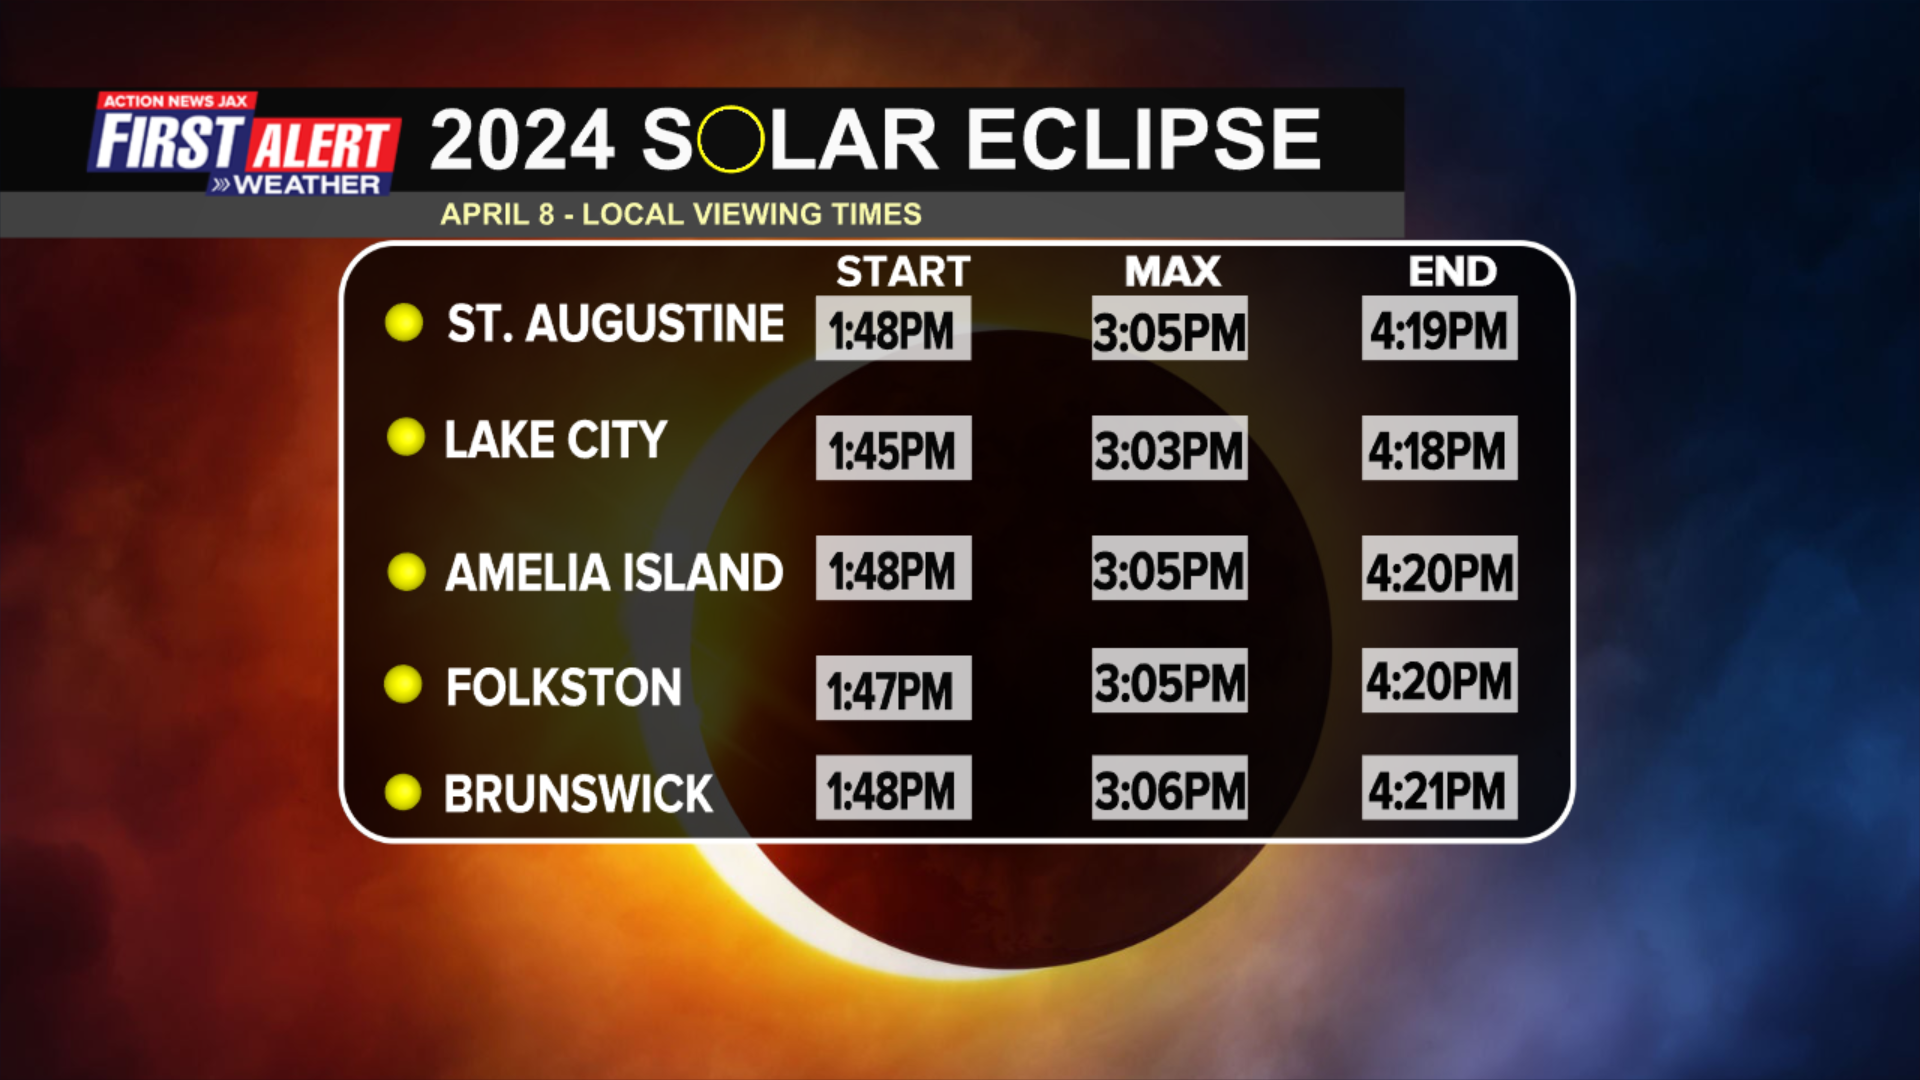 2024 Solar Eclipse Local Viewing Times - St. Augustine